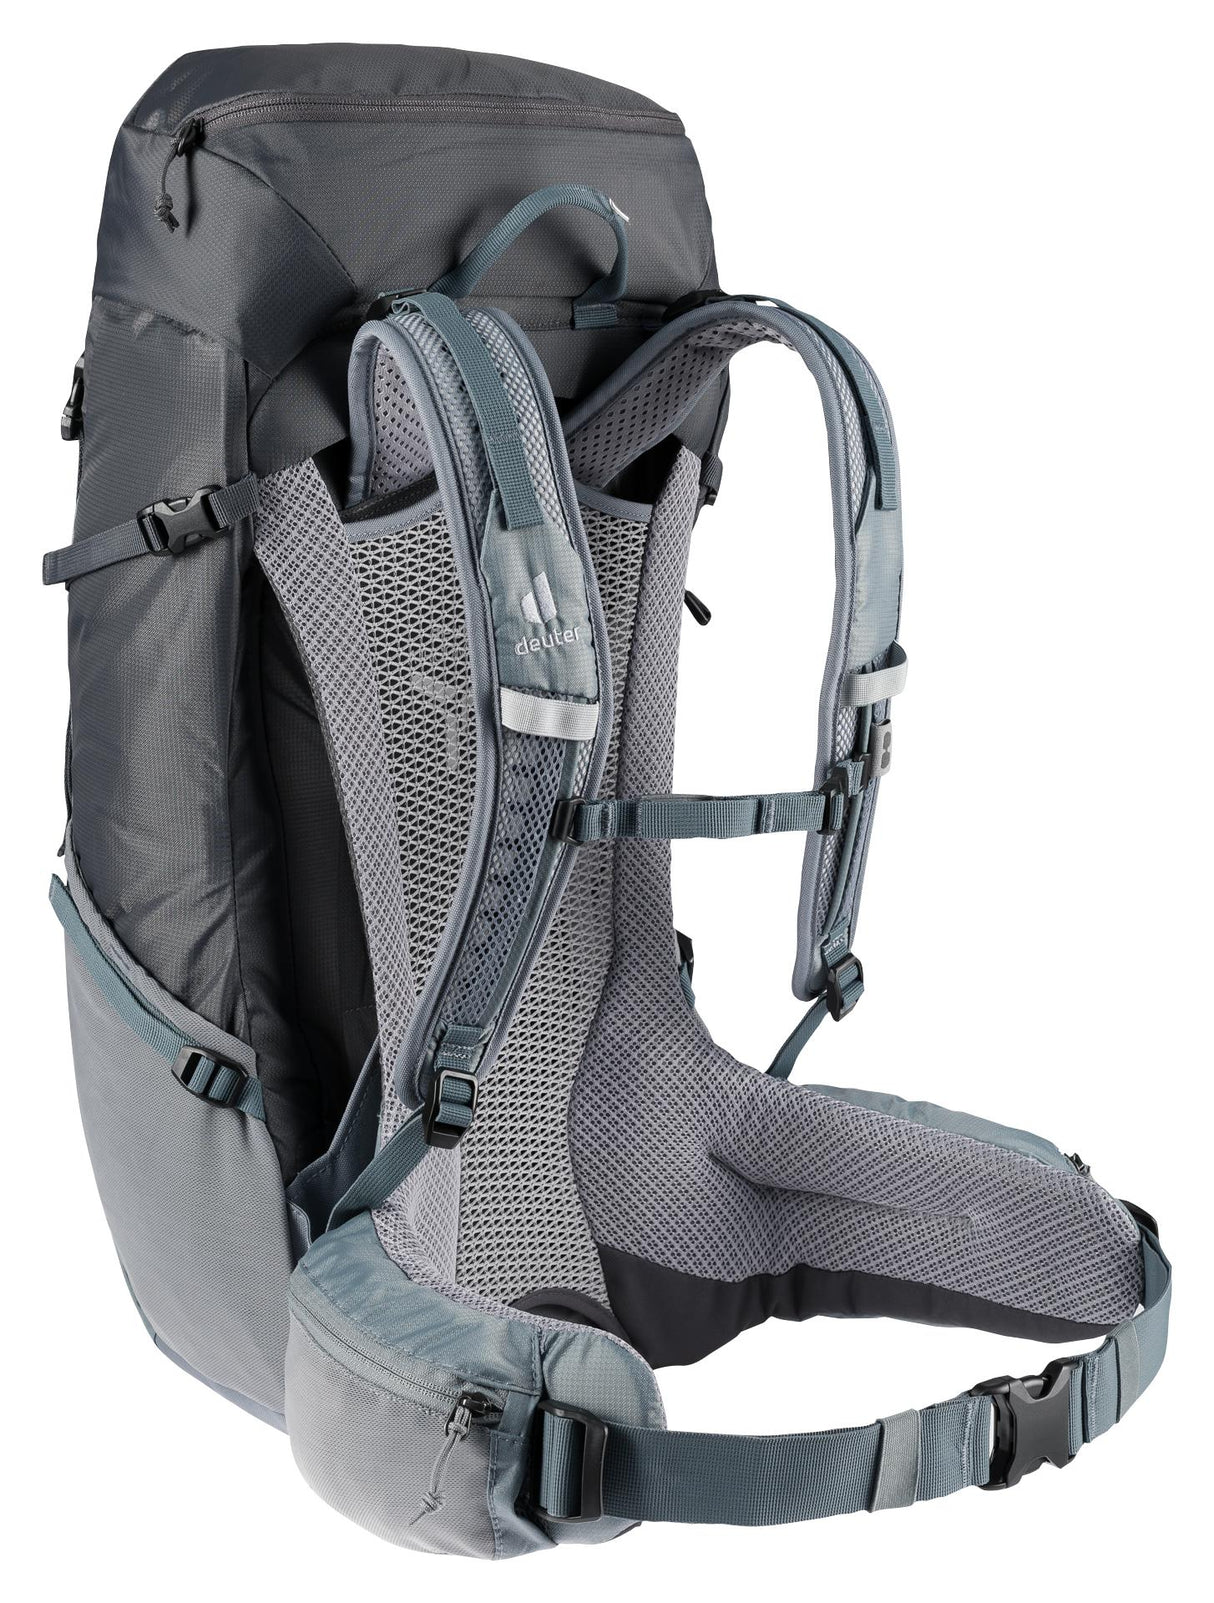 Deuter Futura 26 Hiking Backpack-4046051112183-graphite shale-Alpine Start Outfitters